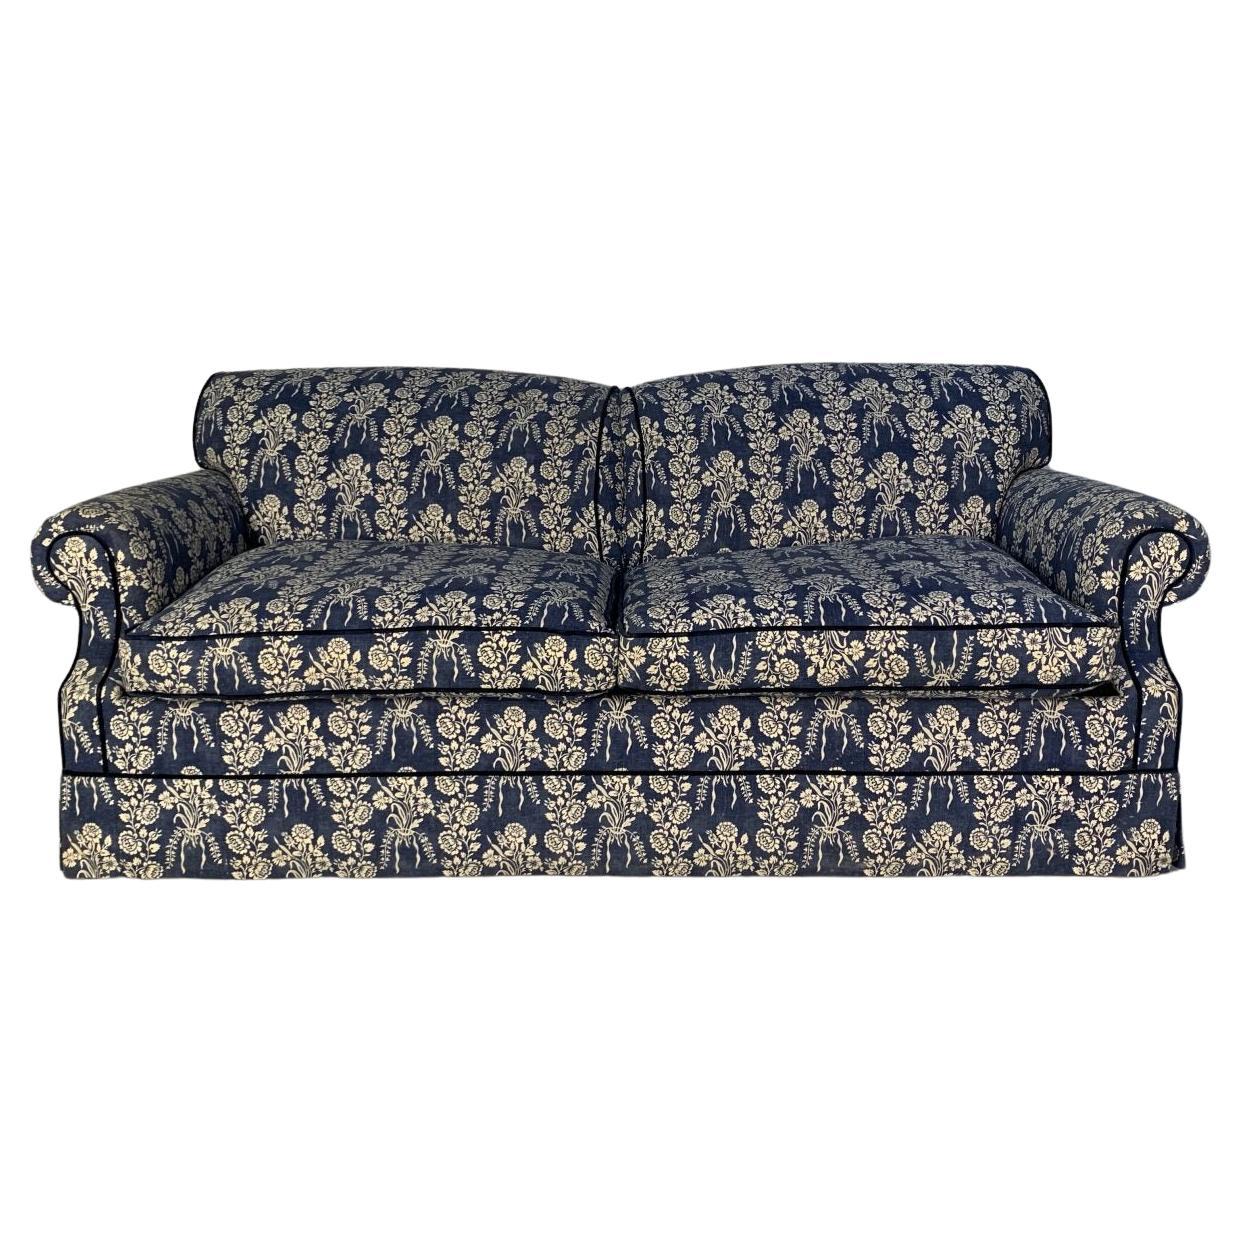 William Yeoward “Percy” 2.5-Seat Sofa Bed in Blue Patterned Fabric